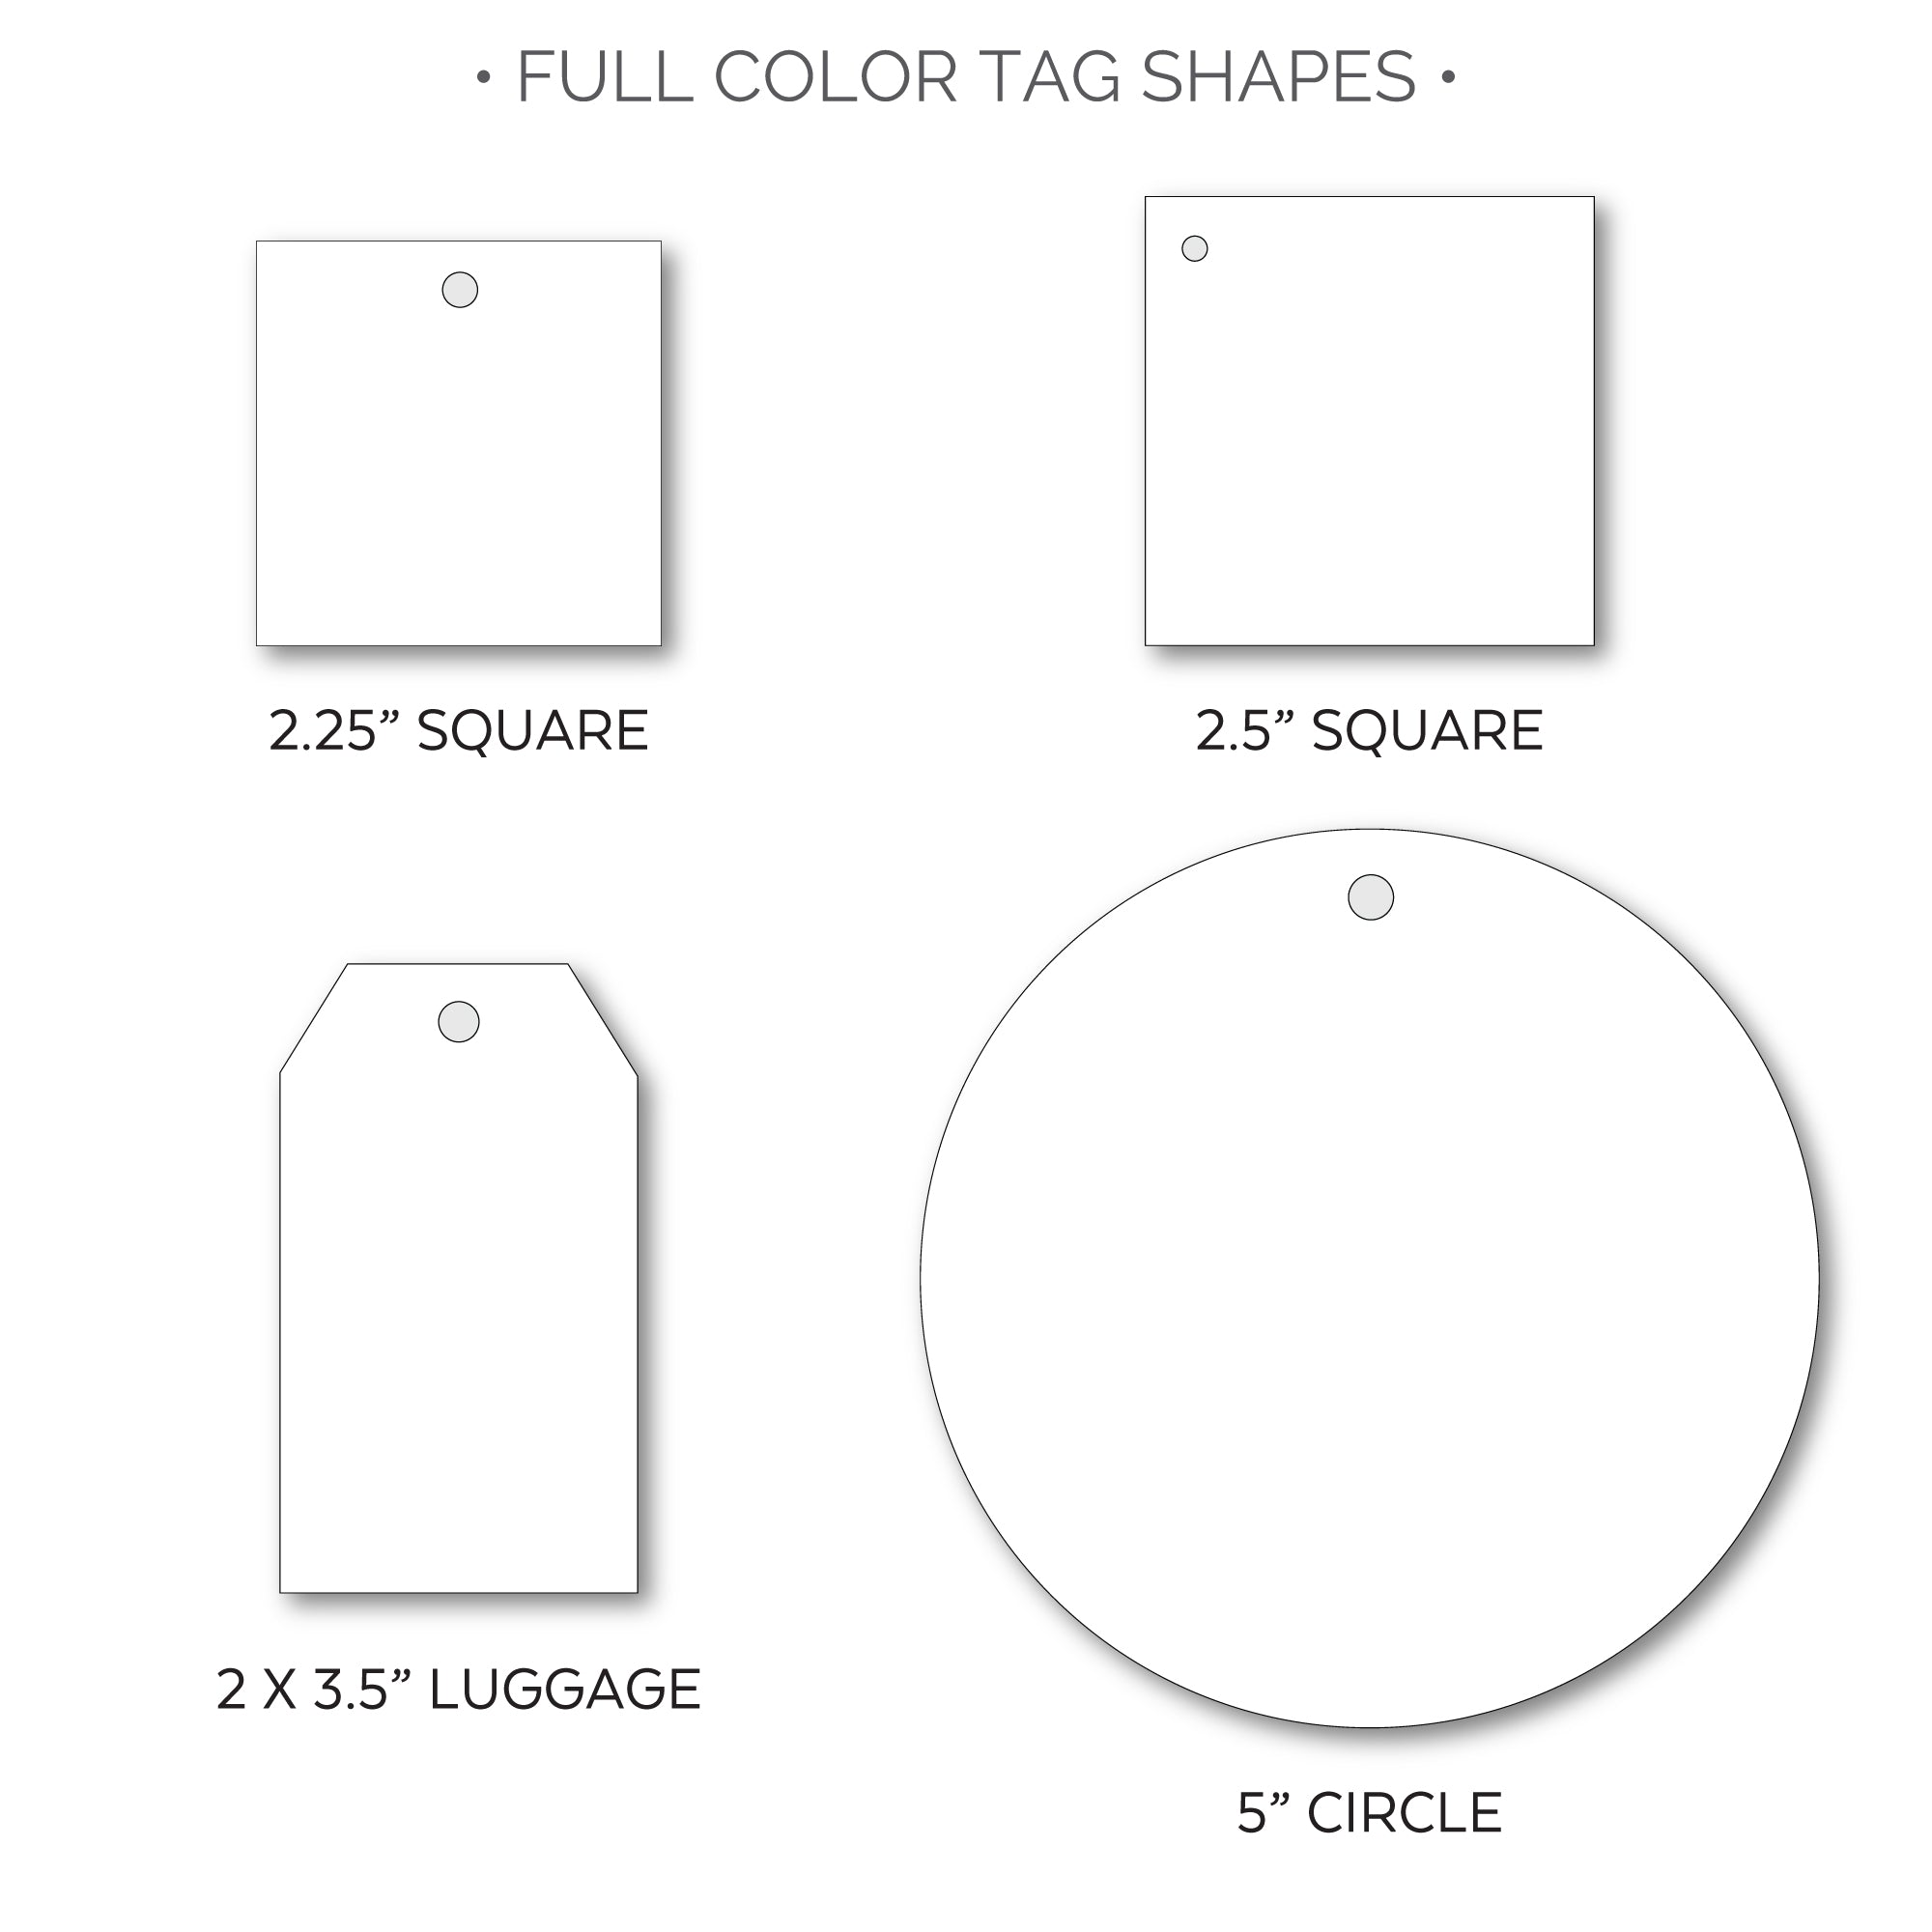 Full Color Tag Shapes